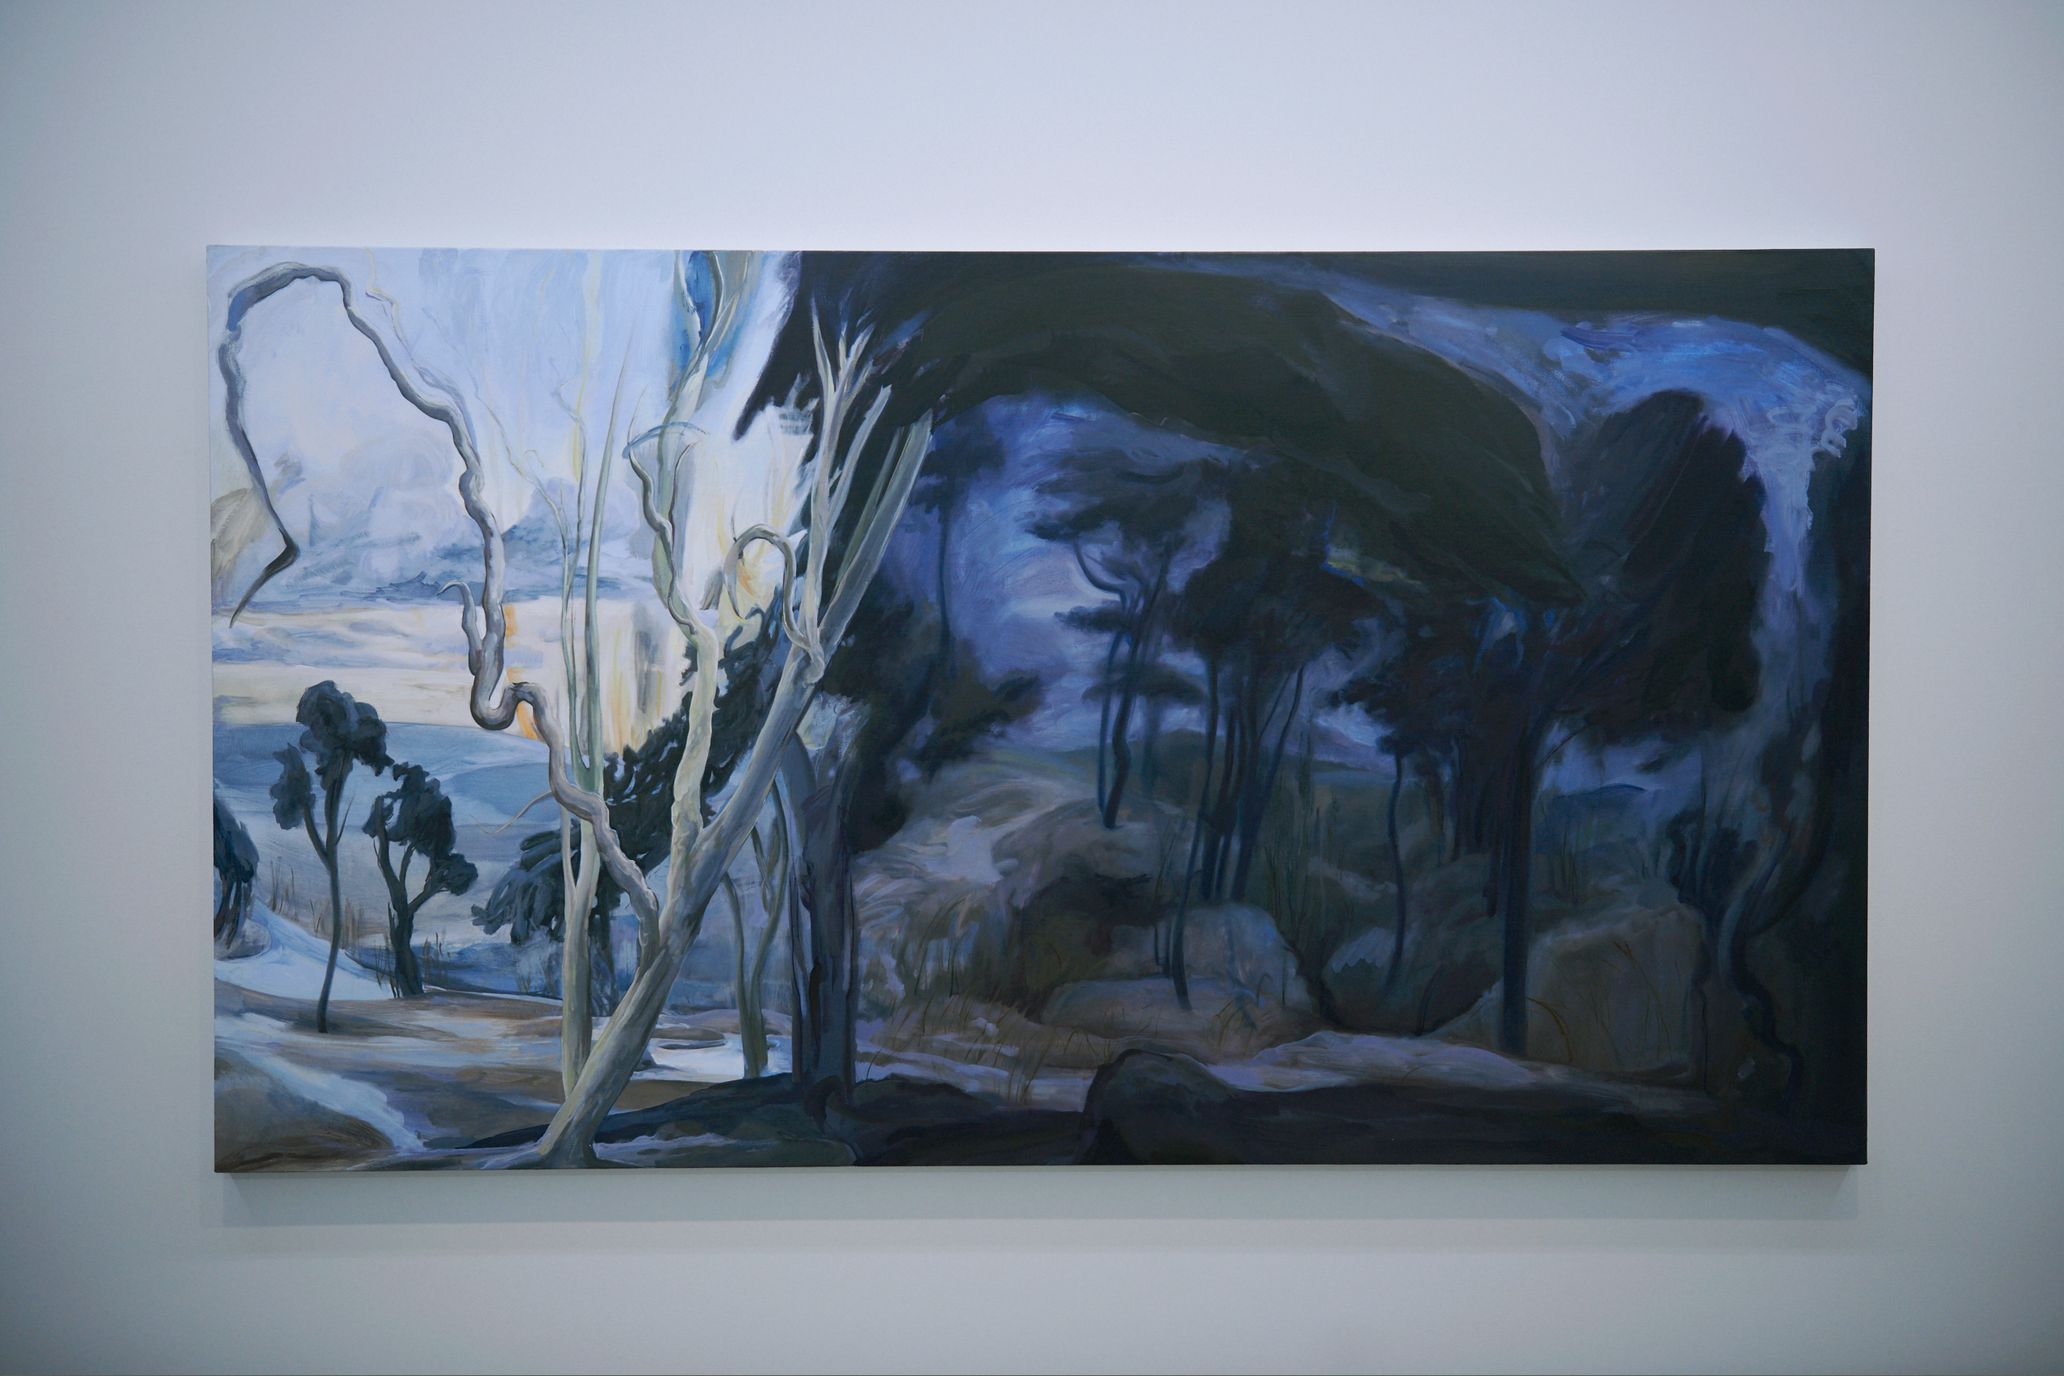 A Hybrid of Technology and Oil Painting: Emma Webster’s Landscape on the boundary